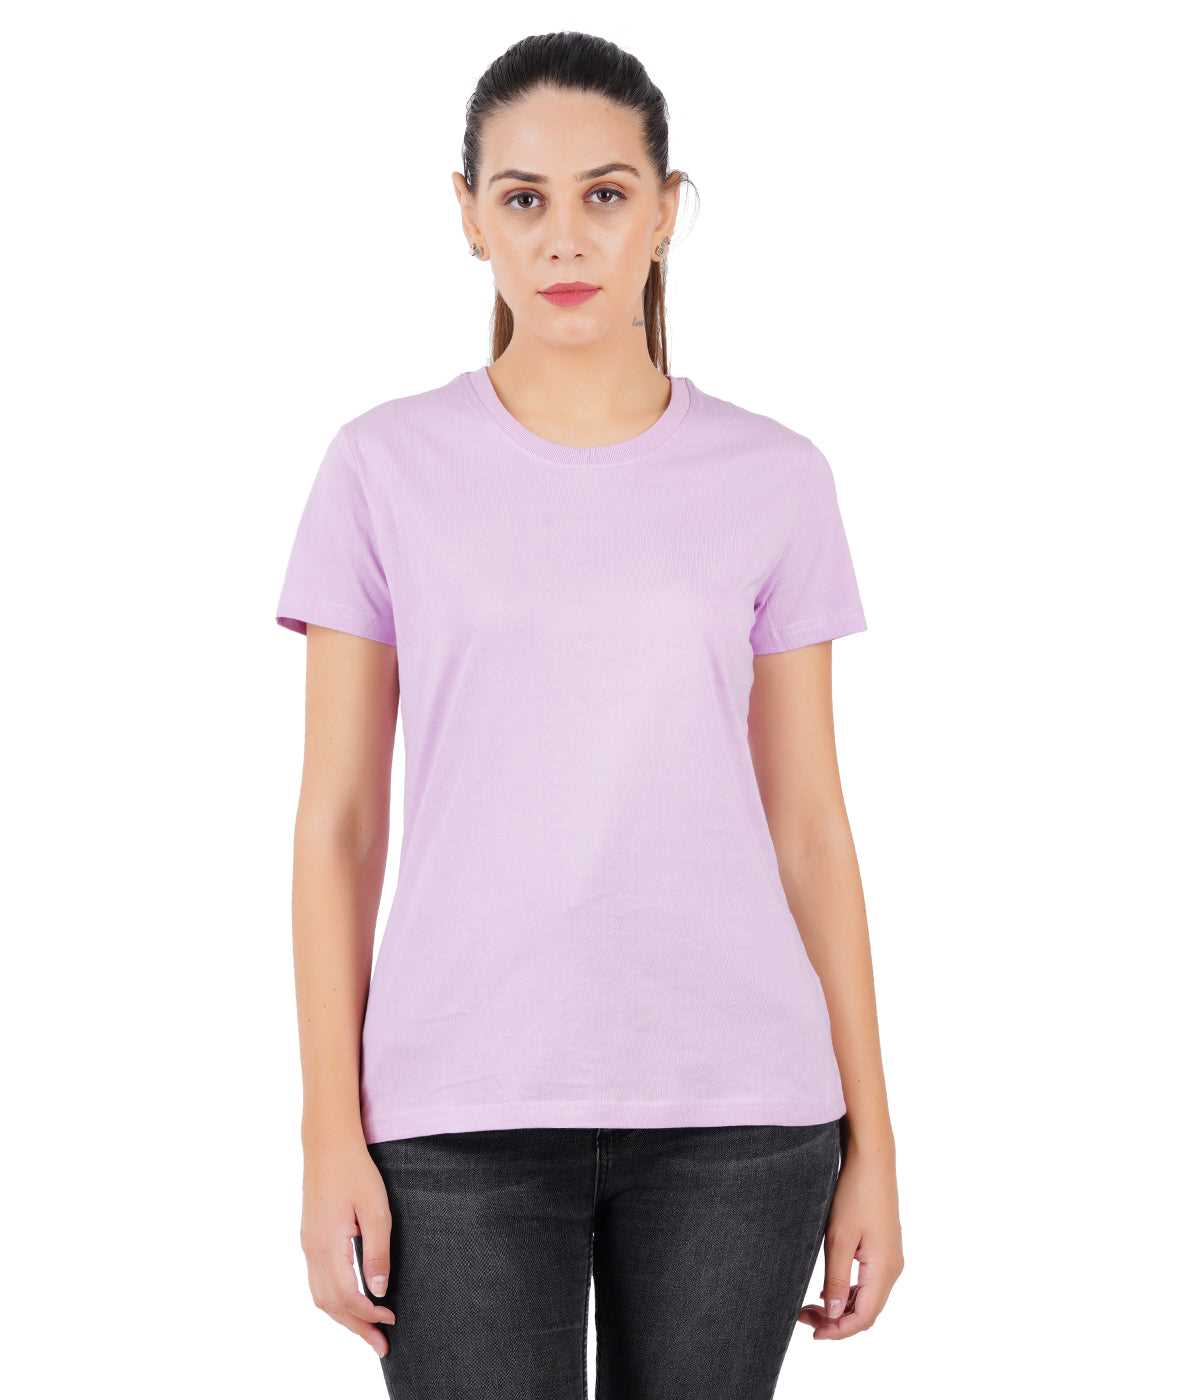 Lilac round neck t-shirt for women